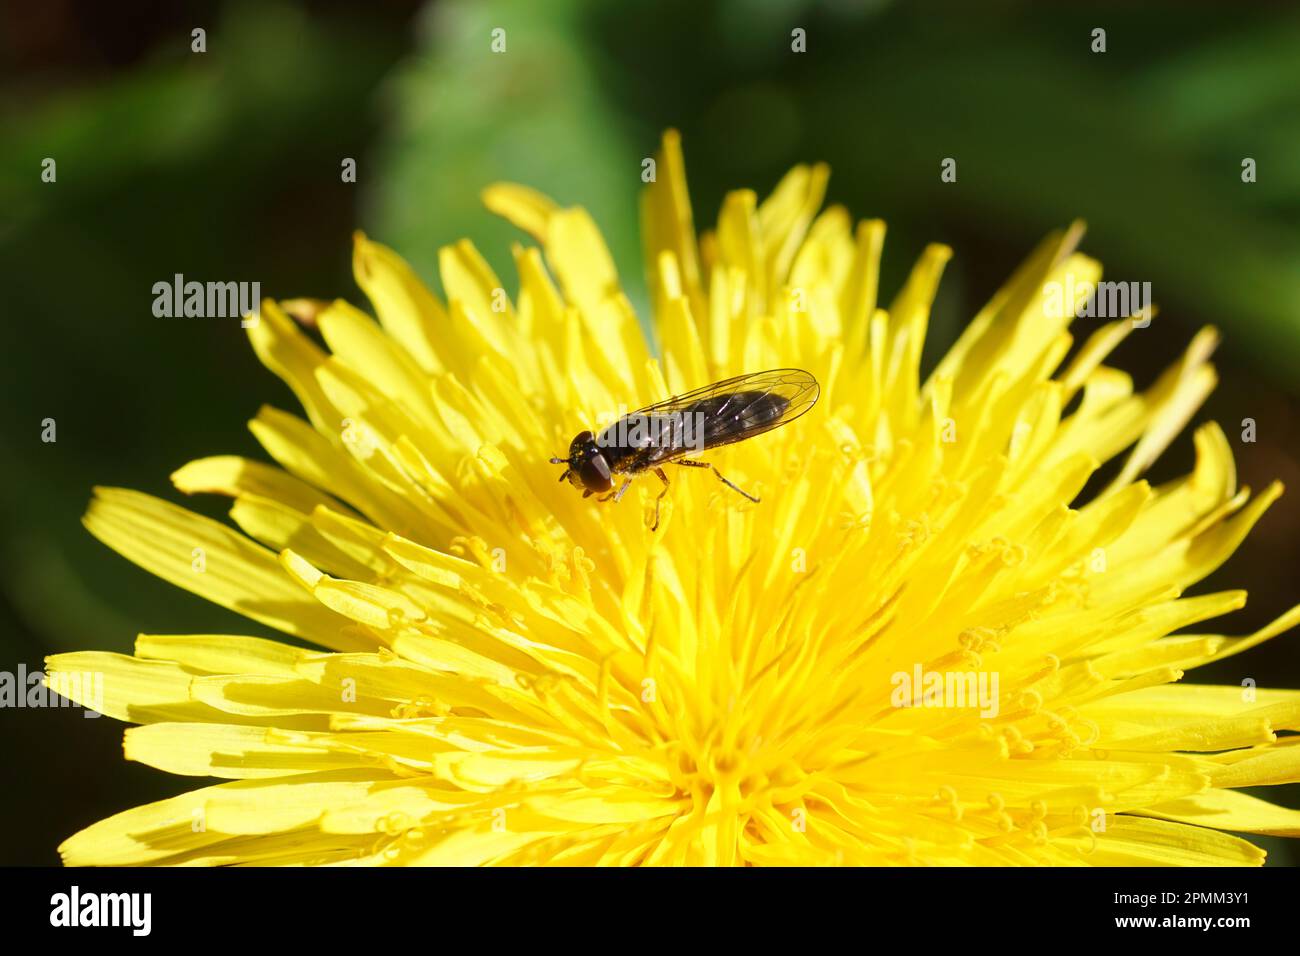 Closeup female hoverfly Platycheirus albimanus, family hoverflies (Syrphidae) on the flower of Taraxacum officinale, the common dandelion, Stock Photo